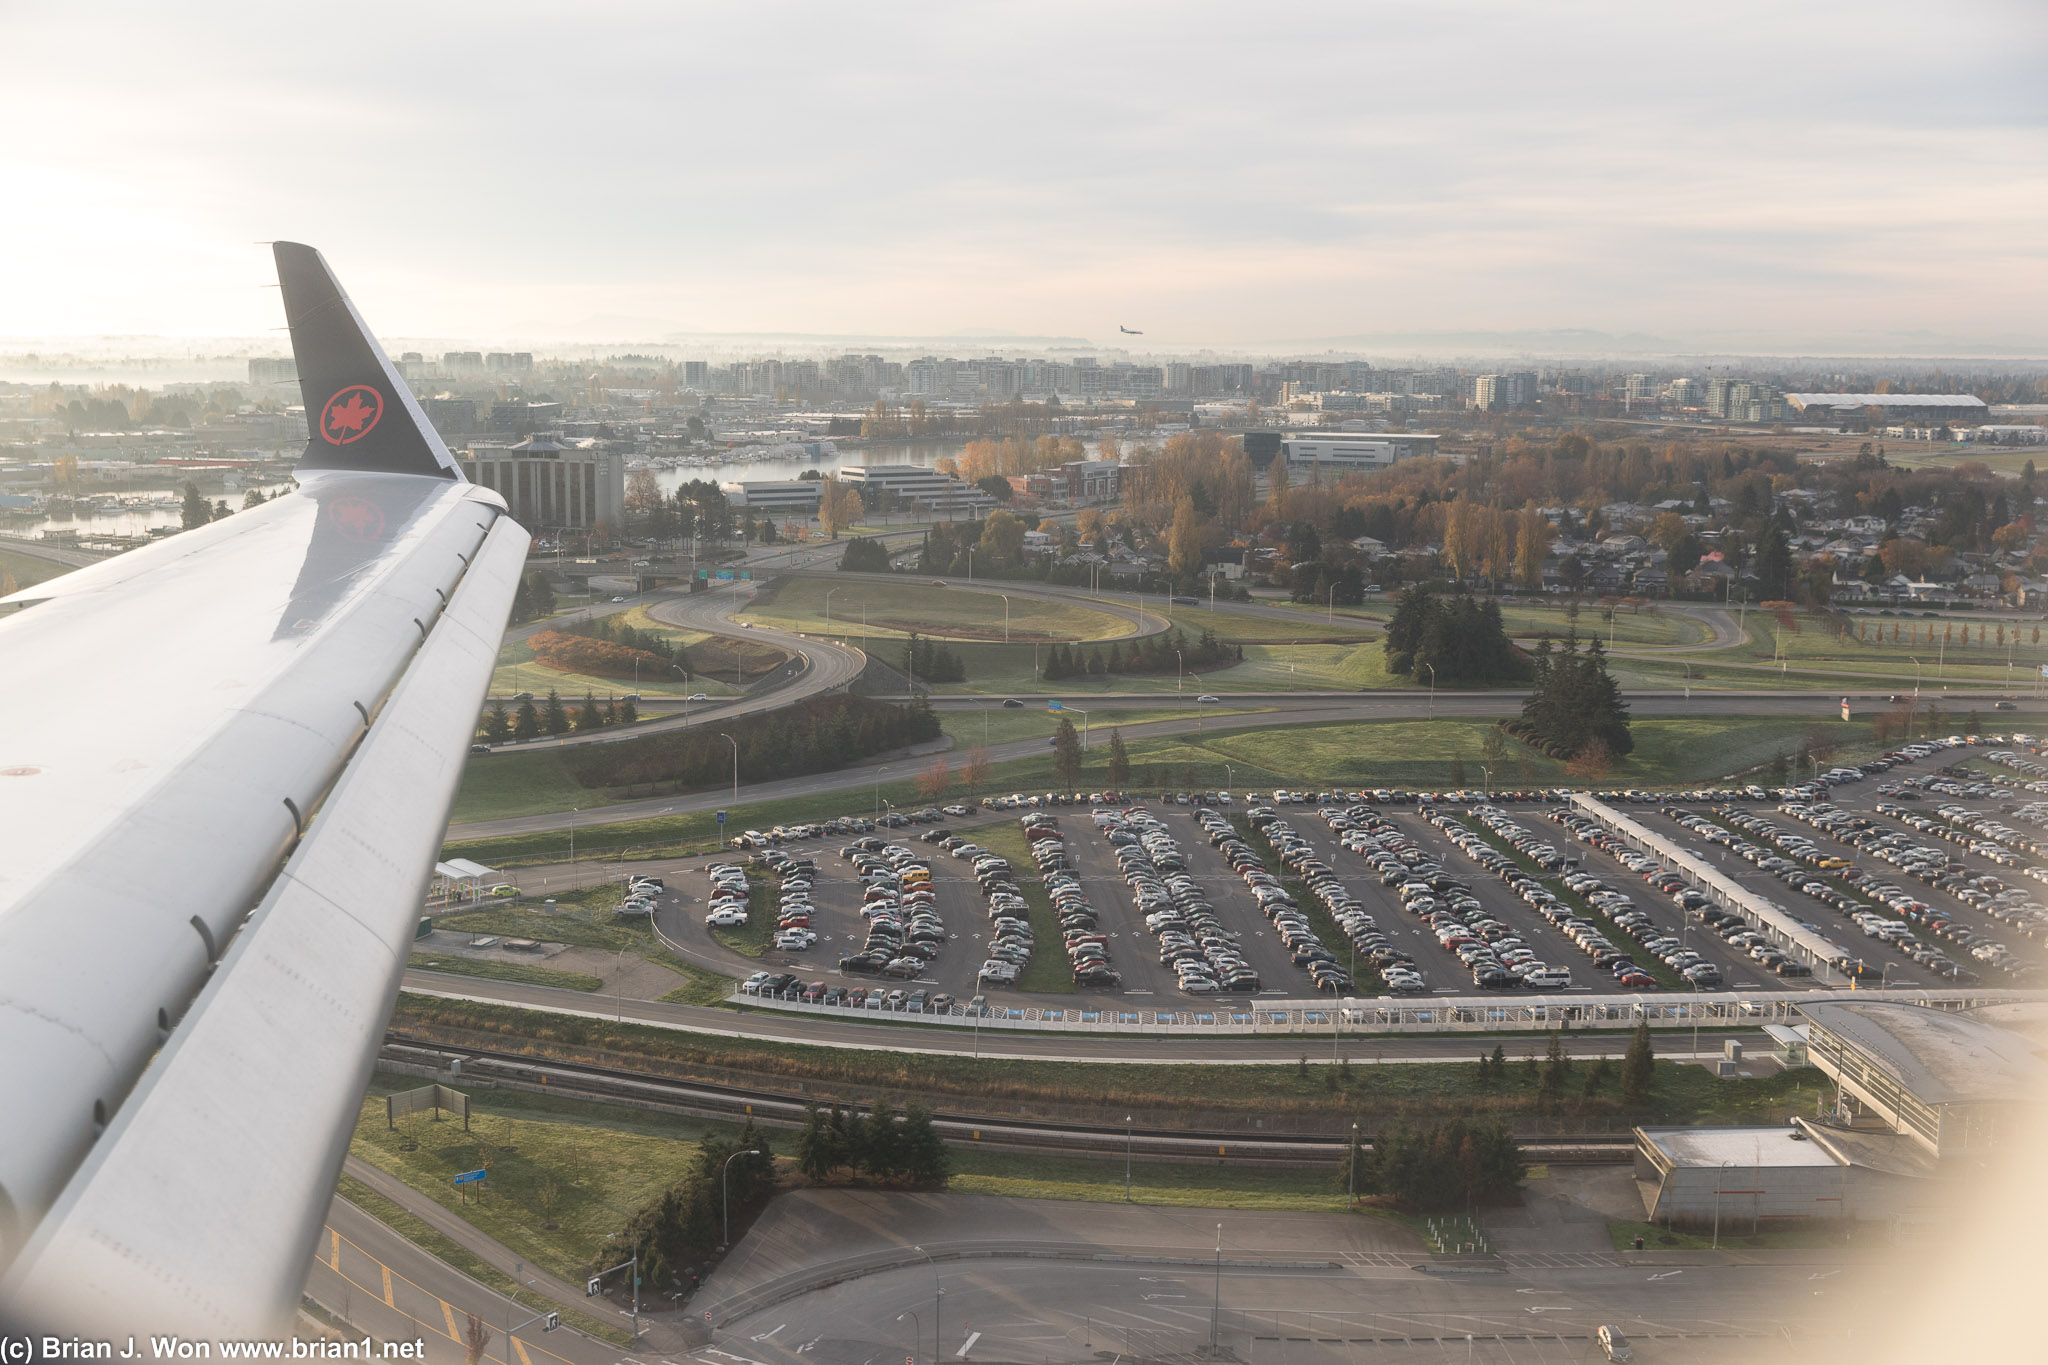 Final approach to Vancouver International Airport.